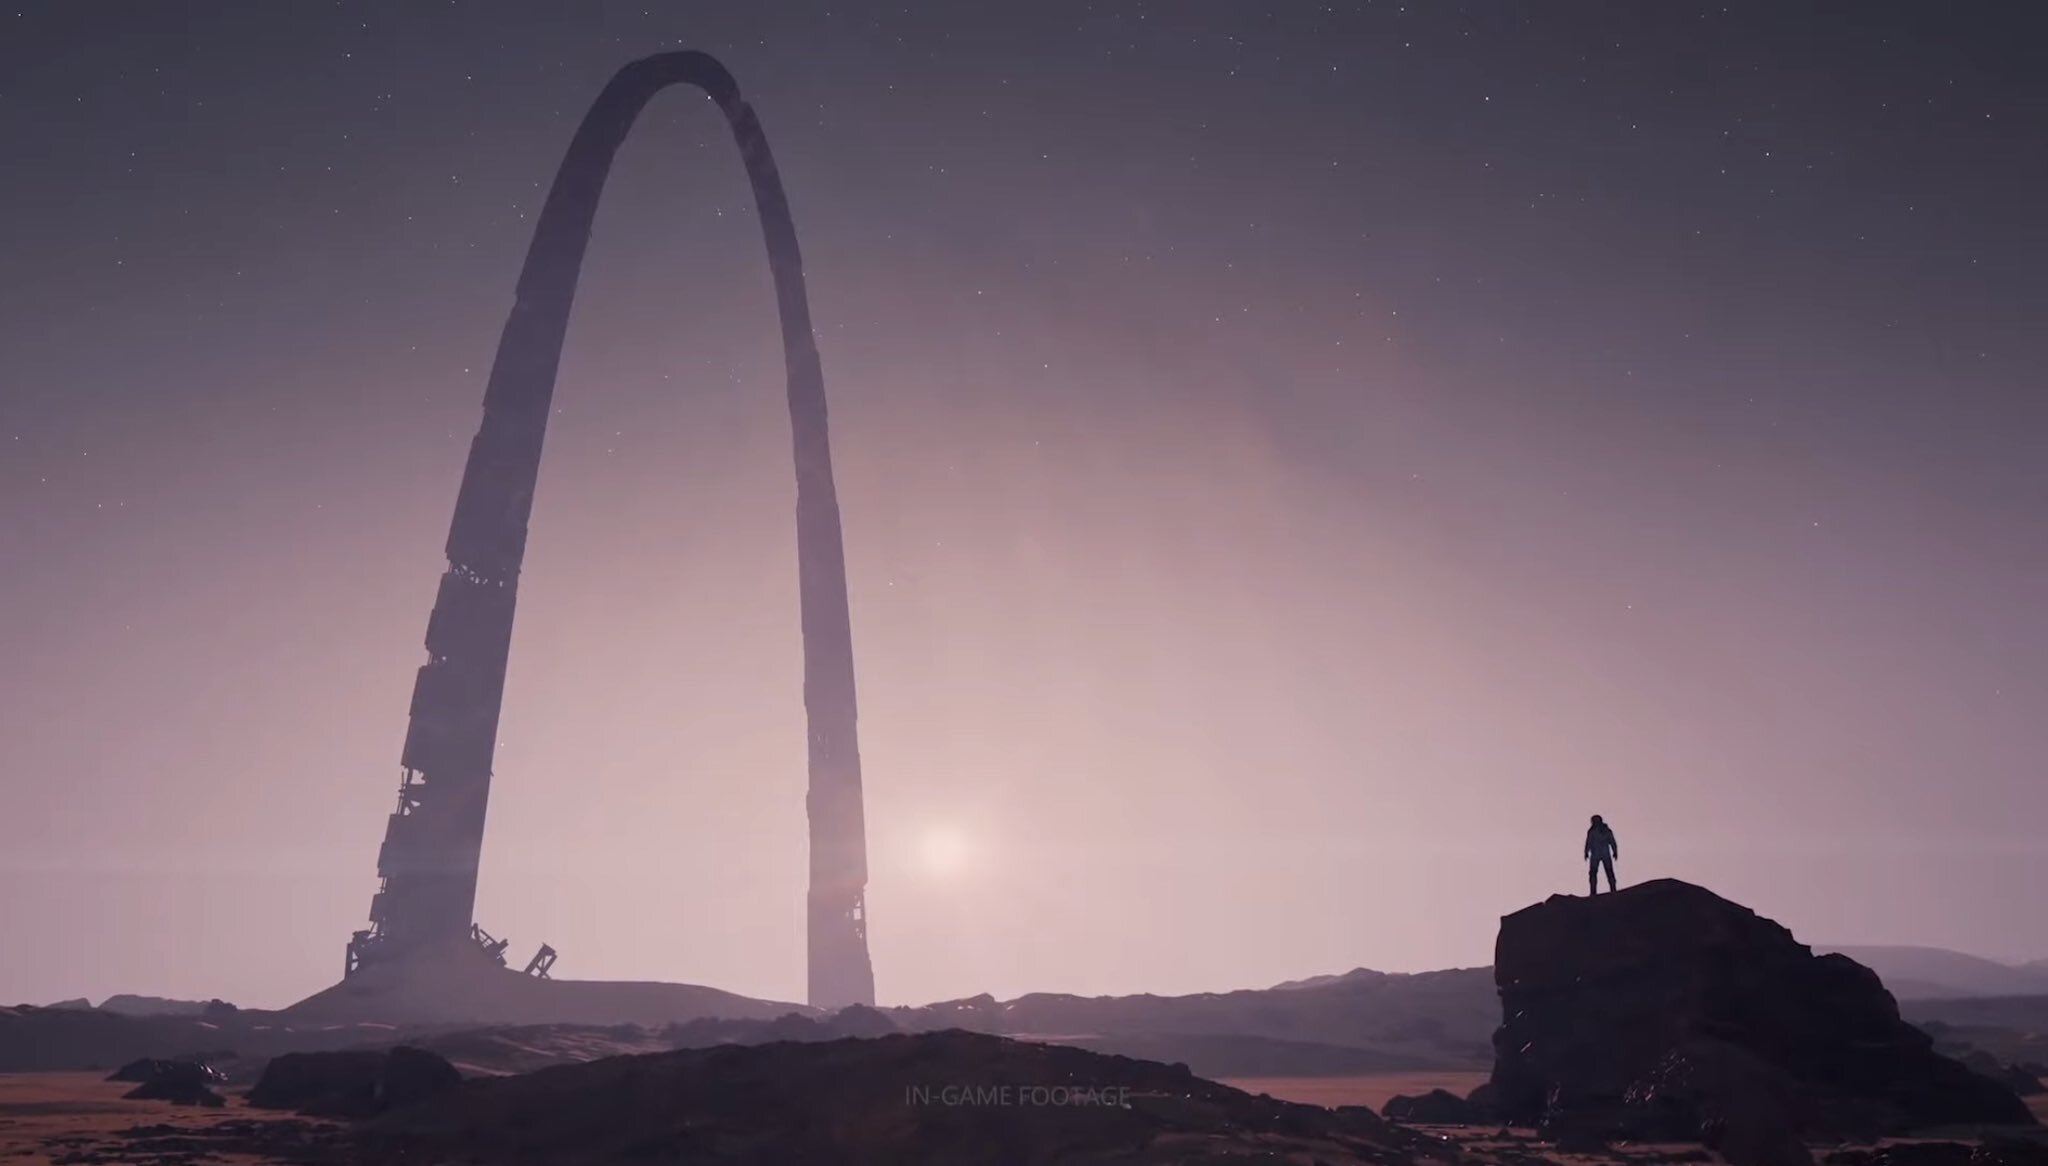 Something that looks like the St. Louis Gateway arch in the middle of a reddish desert